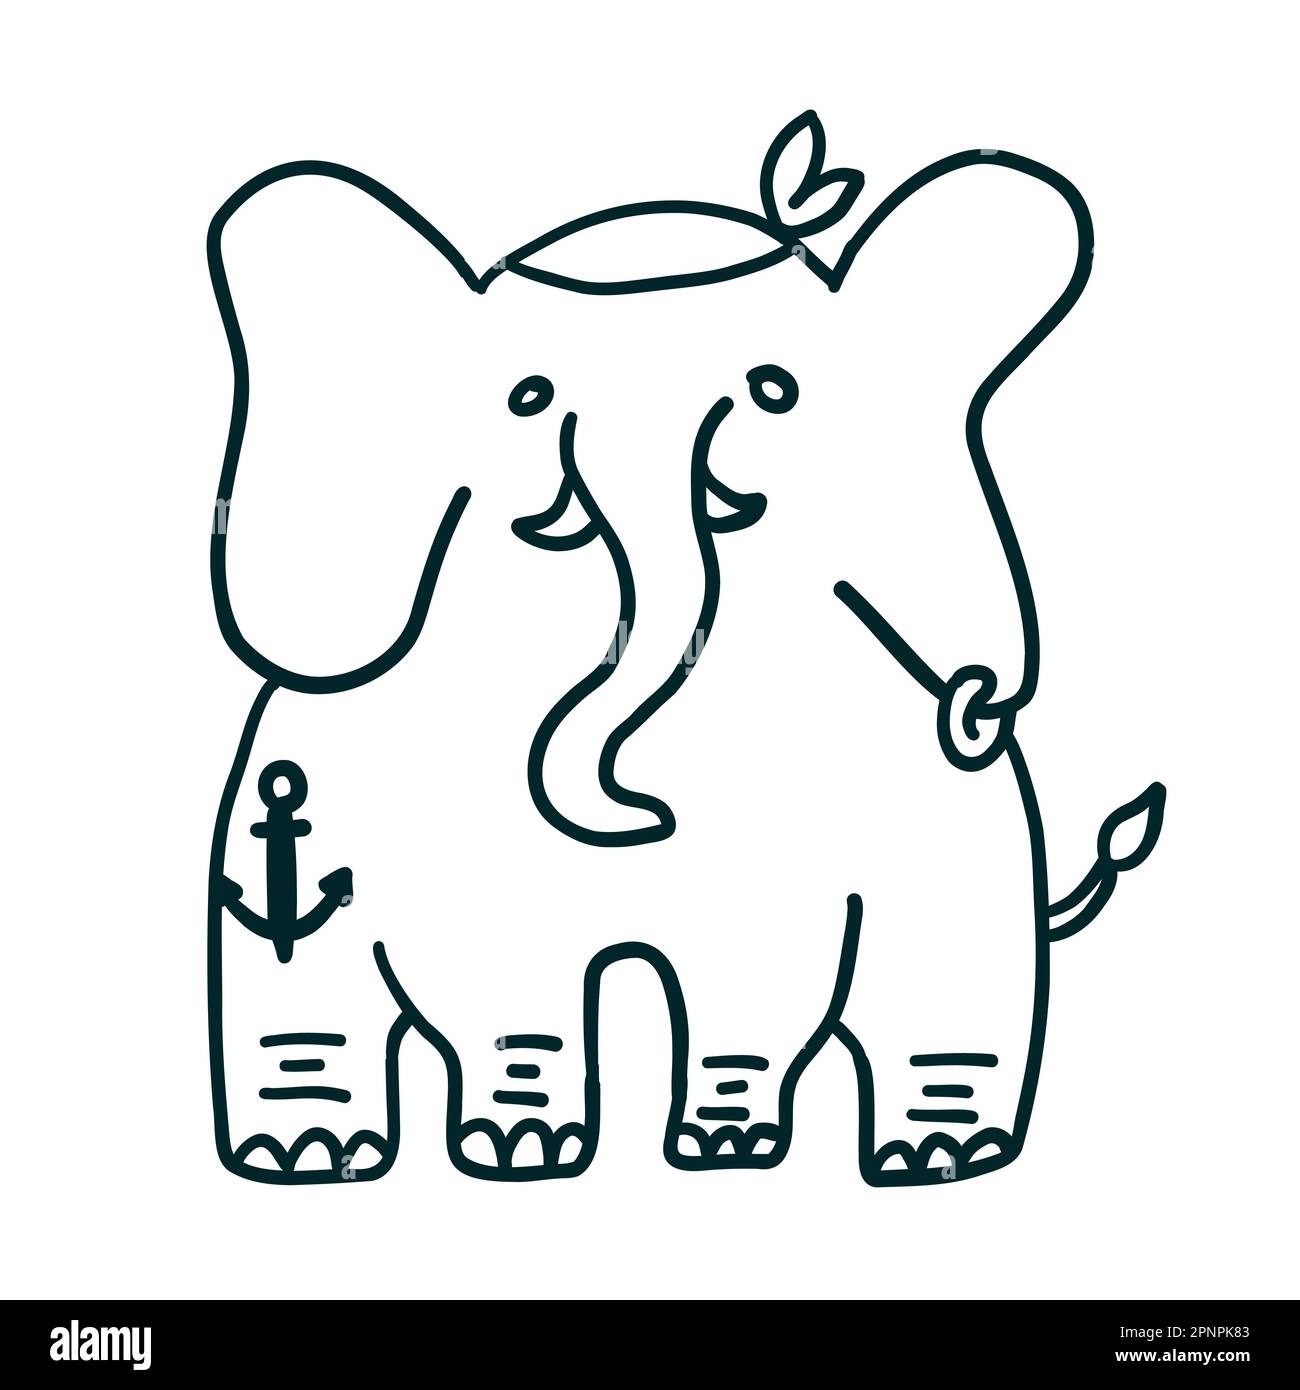 Elephant pirate. Vector illustration in outline doodle style isolated on white background. Stock Vector